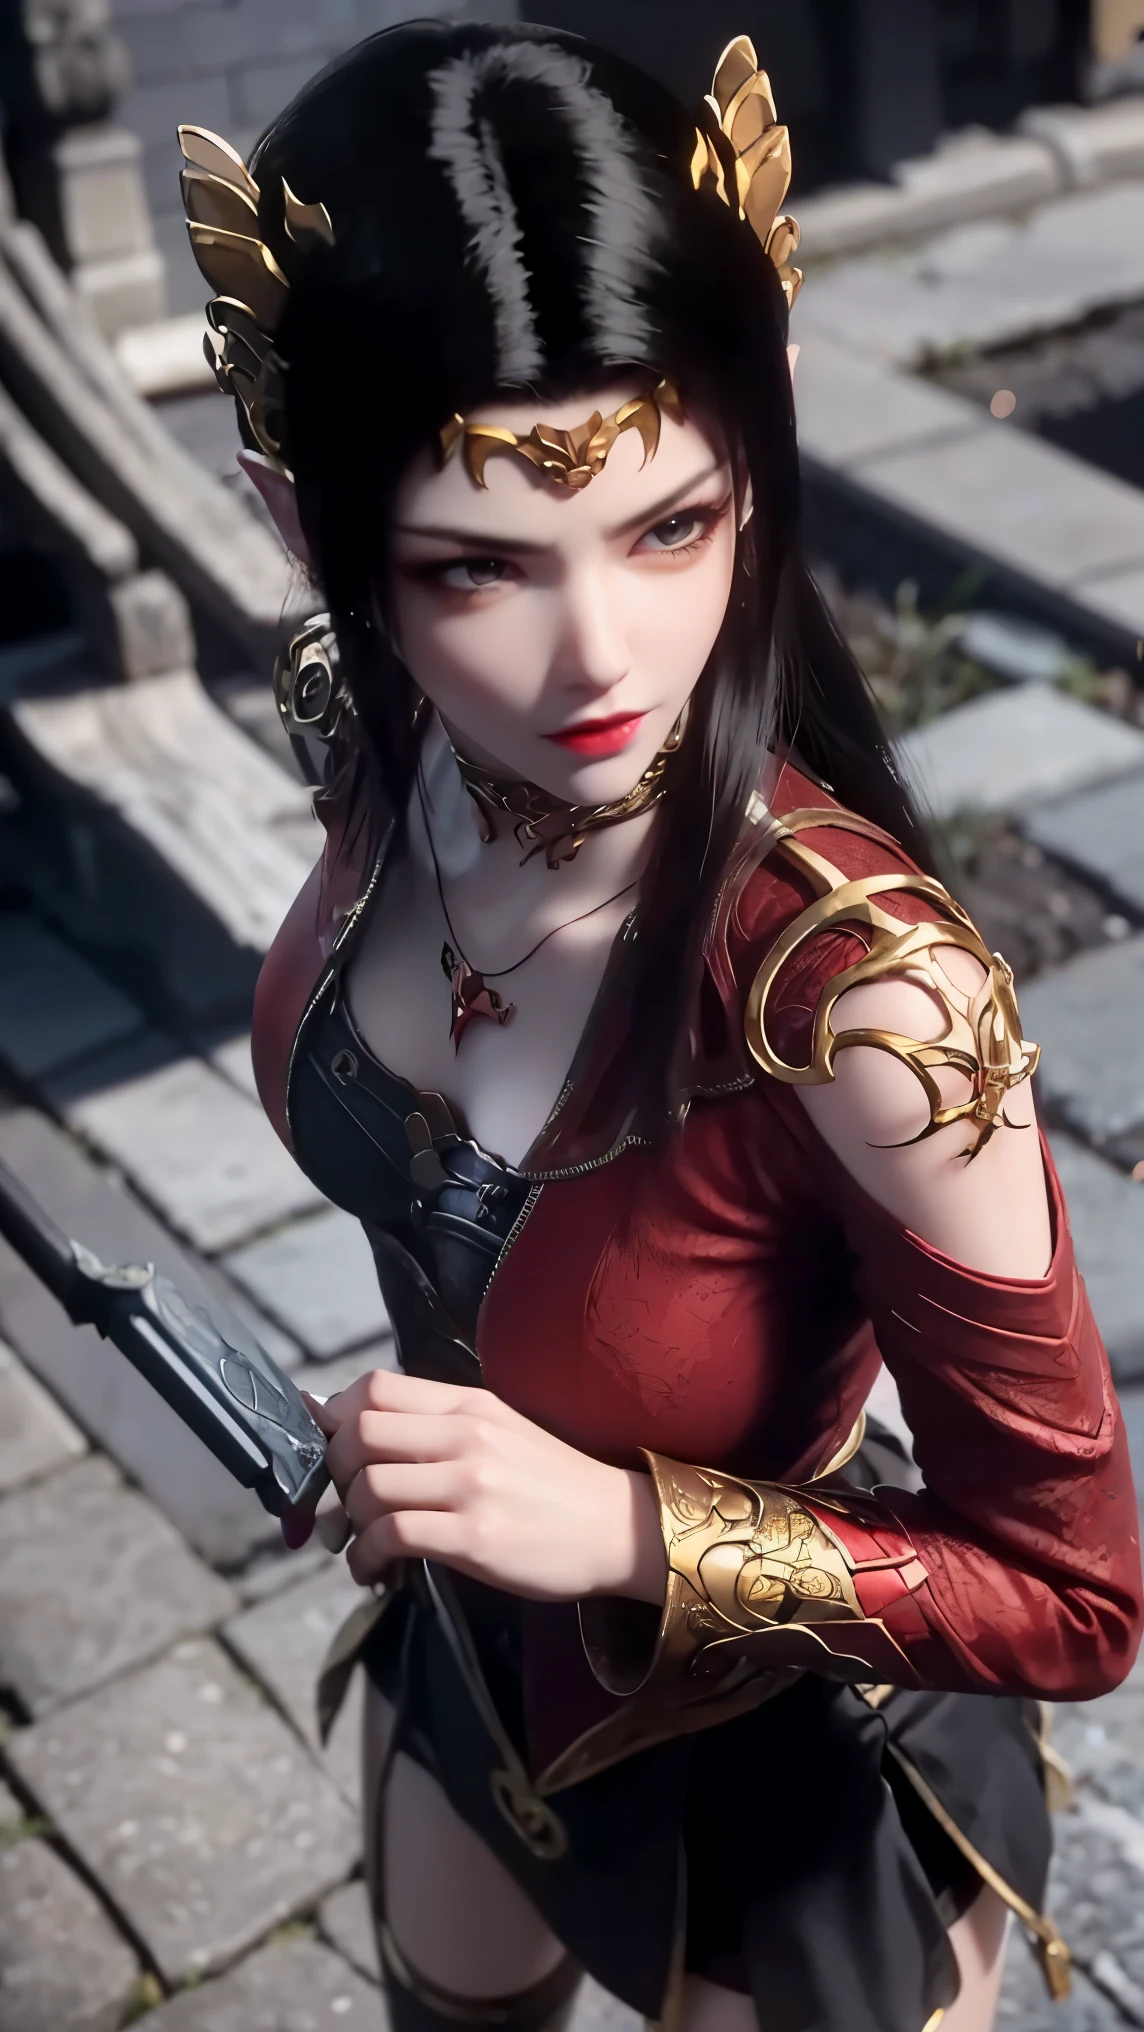 Walnut,vampire,assassin,charming,Mature,Sexy,thin,Qi bangs,long hair,Antenna bangs,double tail,高double tail,Bangs cover one eye,frightened,angry,Smile,blush,red nose,drunk,eyes straight,exquisite eyes,red lips,perfect face,Cross your arms across your chest,Dark Skin,dynamic poses,fighting stance,near,school swimsuit,damaged clothing,Cloak,leather skirt,Black,,Spandex gloss,Laser reflective material,Detail background,Bubble angry,bubble blush,heart-shaped,notes,Q version,official art,lifelike,movie angle,Dynamic angle,Horizontal viewing angle,depth of field,movie lighting,colorful,PBR rendering+UE pull,32k,High resolution,high quality,beautiful wallpaper,